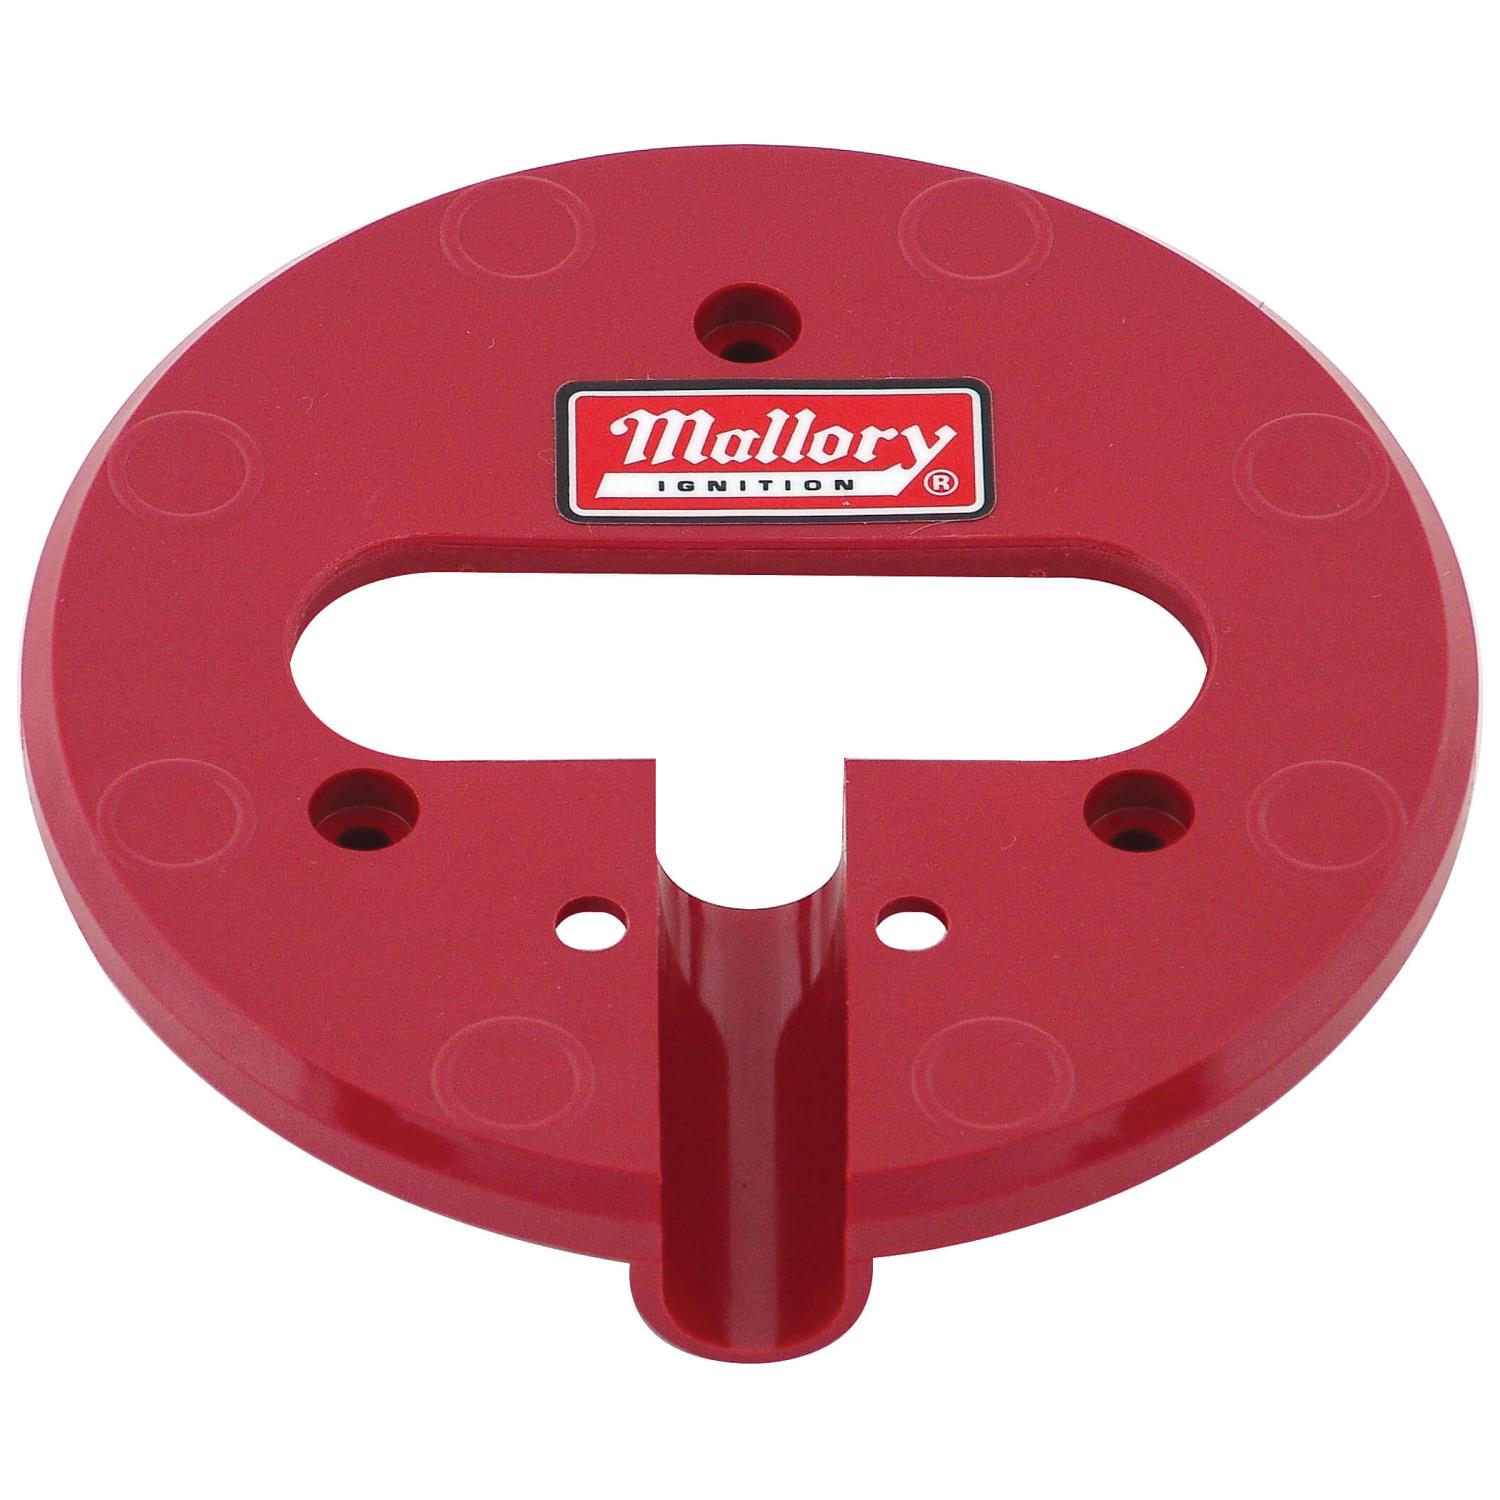 Wire Retainer For Mallory Series 81, 82, 83, 84 & 95 all with Pro Cap 86, 87, 89, 91 Sprintmag II and III Super Mag